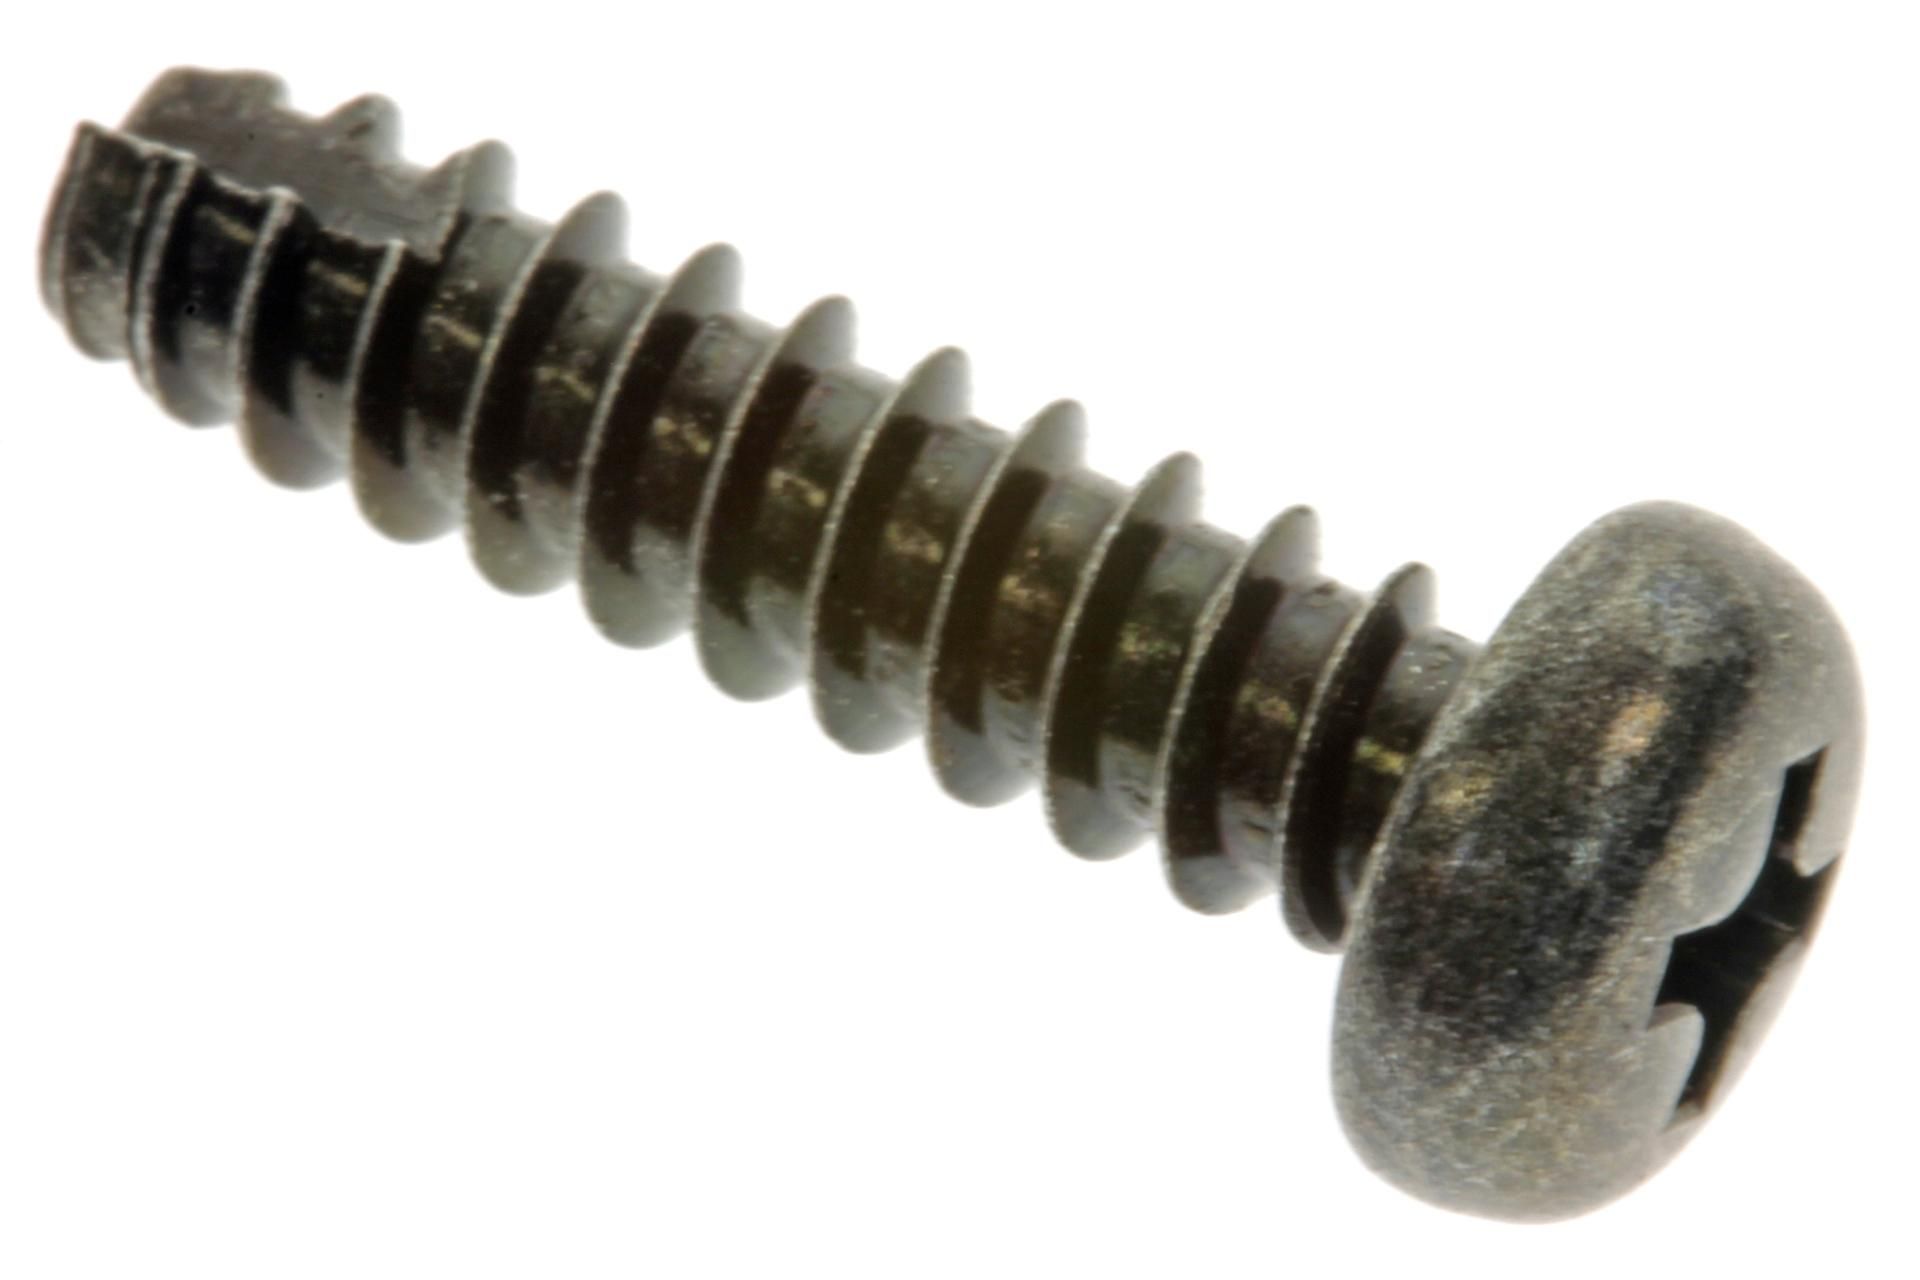 97706-50520-00 Superseded by 97707-50620-00 - SCREW, TRUSS